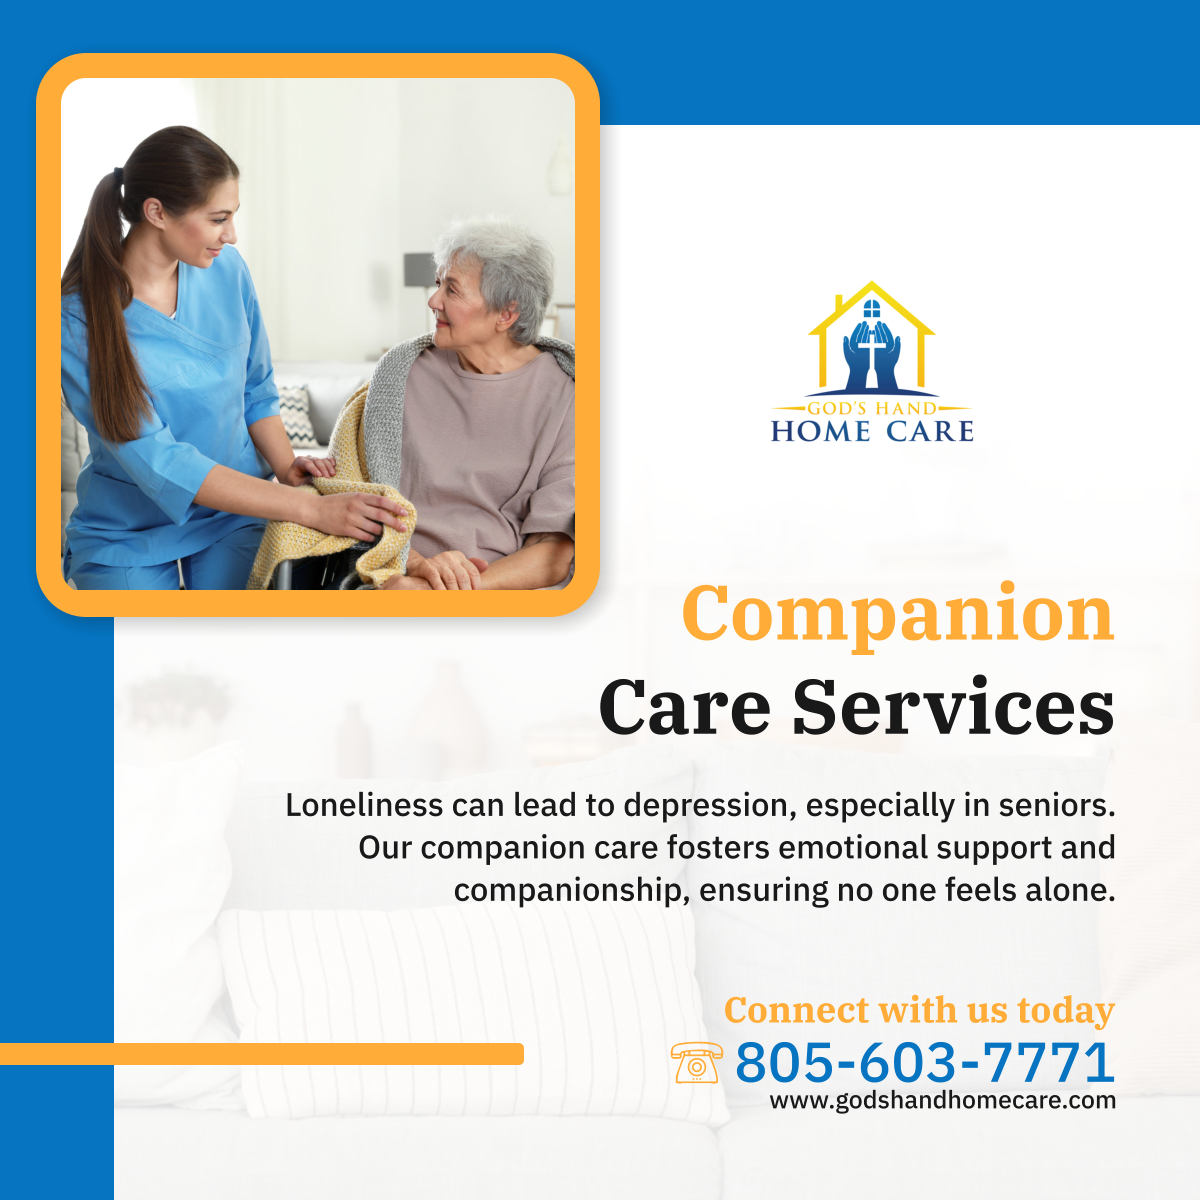 Transform loneliness into moments of joy and companionship. Our caring team is dedicated to providing the warmth and friendship your loved ones deserve. 

#OxnardCA #HomeCare #CompanionCare